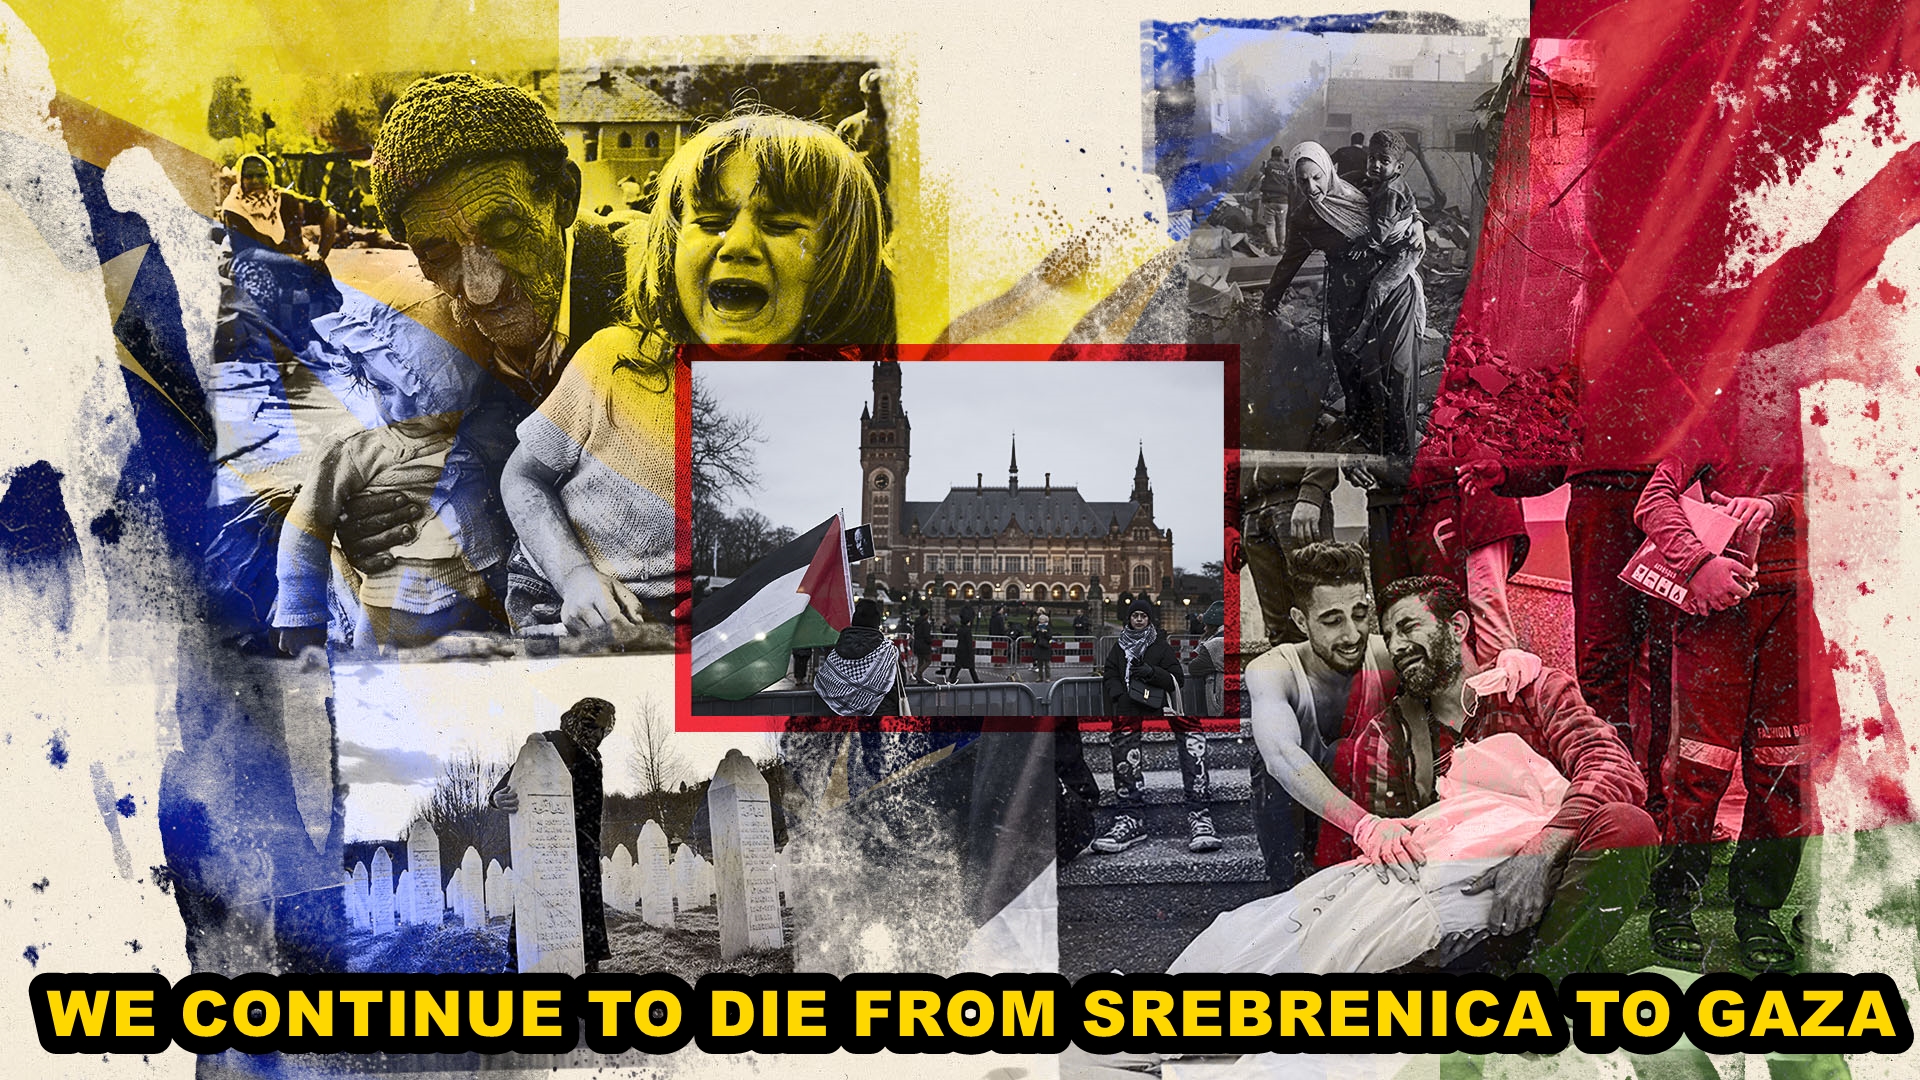 We continue to die from Srebrenica to Gaza